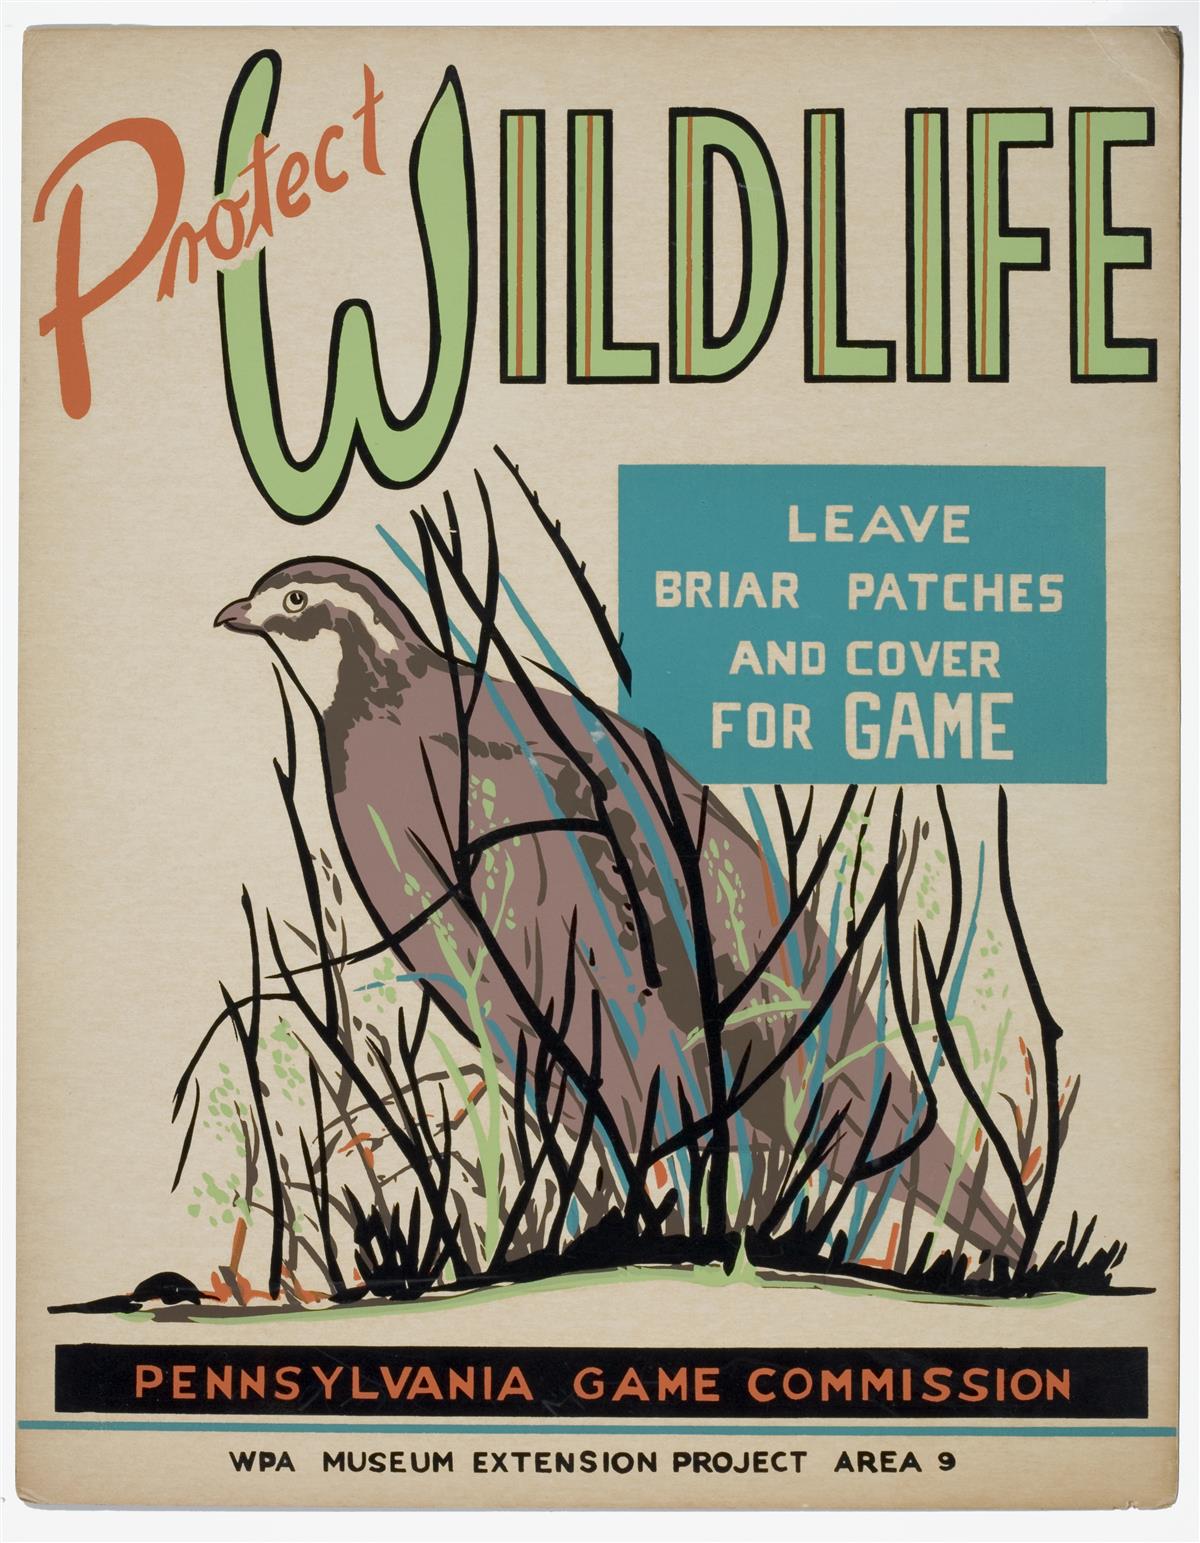 A VINTAGE PA.GAME COMMISSION 100 YEARS OF WILDLIFE SIGNED MAT/PRINT N ROSATO 